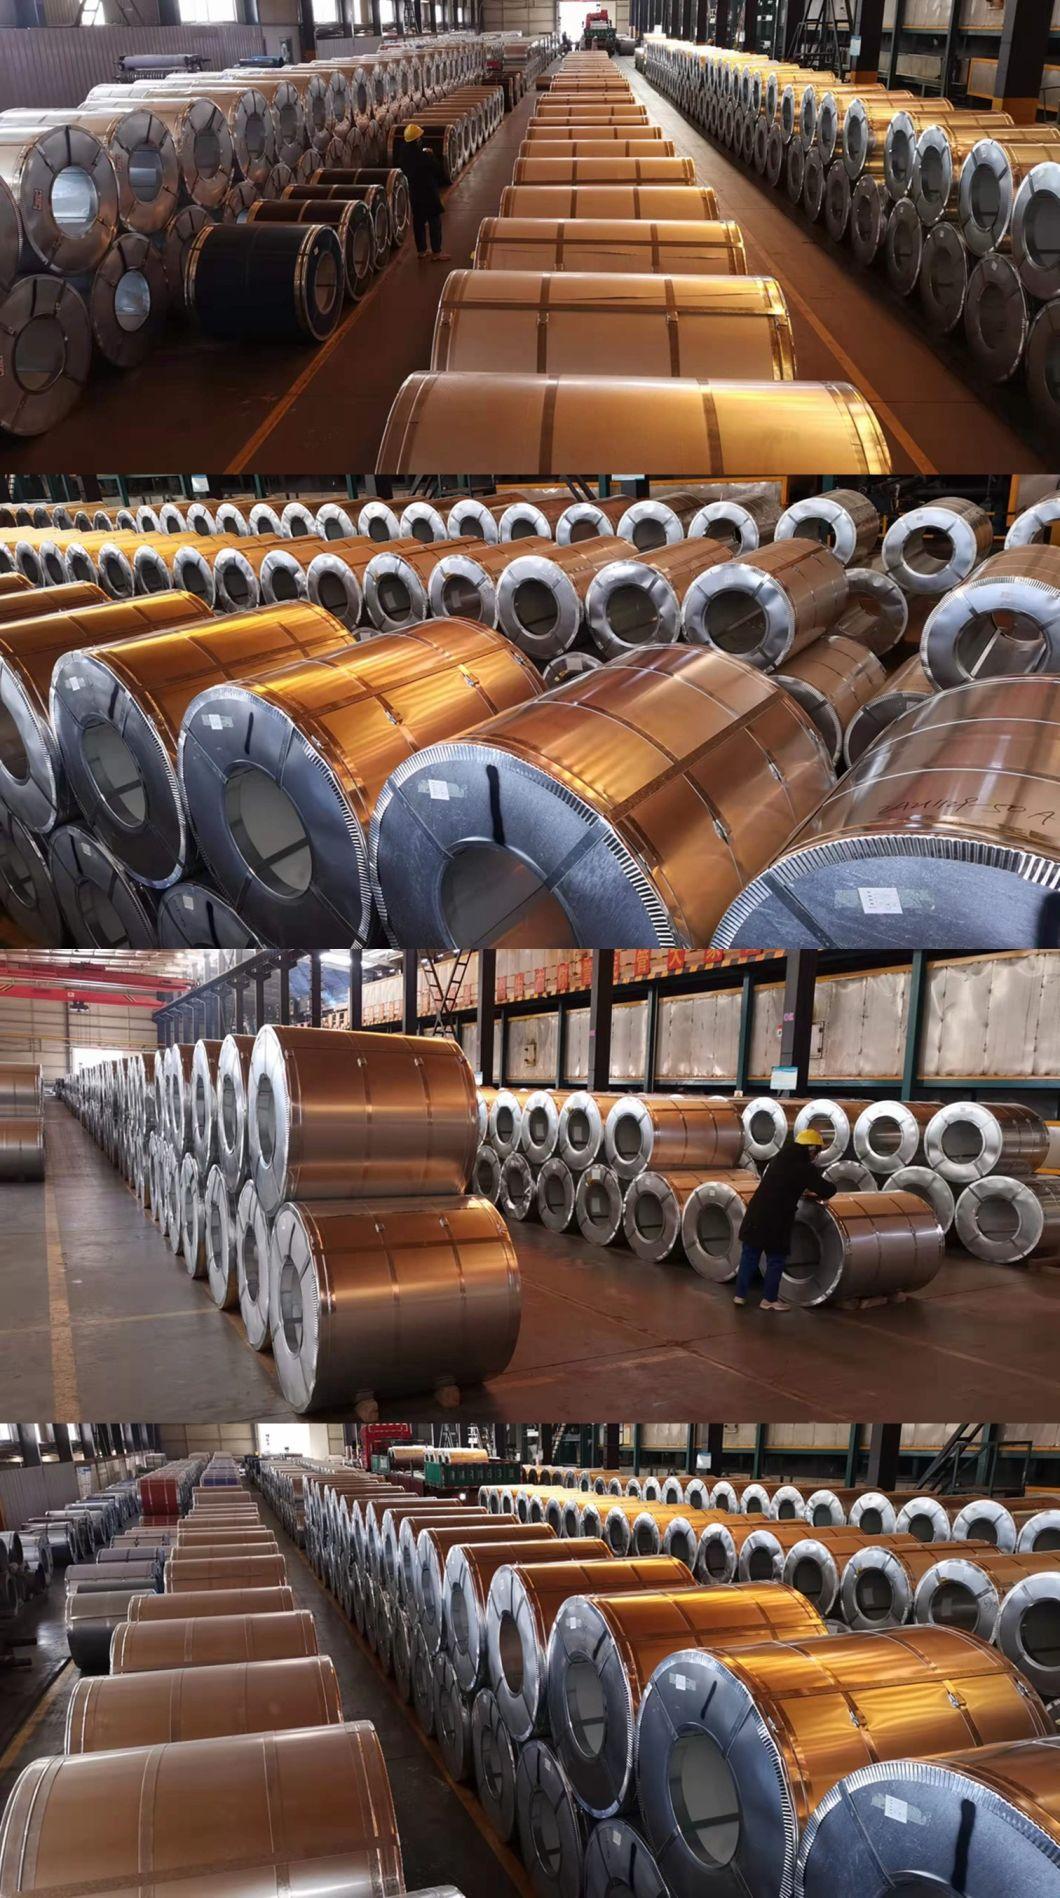 Chinese Manufacturers Direct Sales Steel Wire Rod Rebar Stainless Steel Wire Galvanized Wire Low Carbon Steel Wire Rope Round Bar